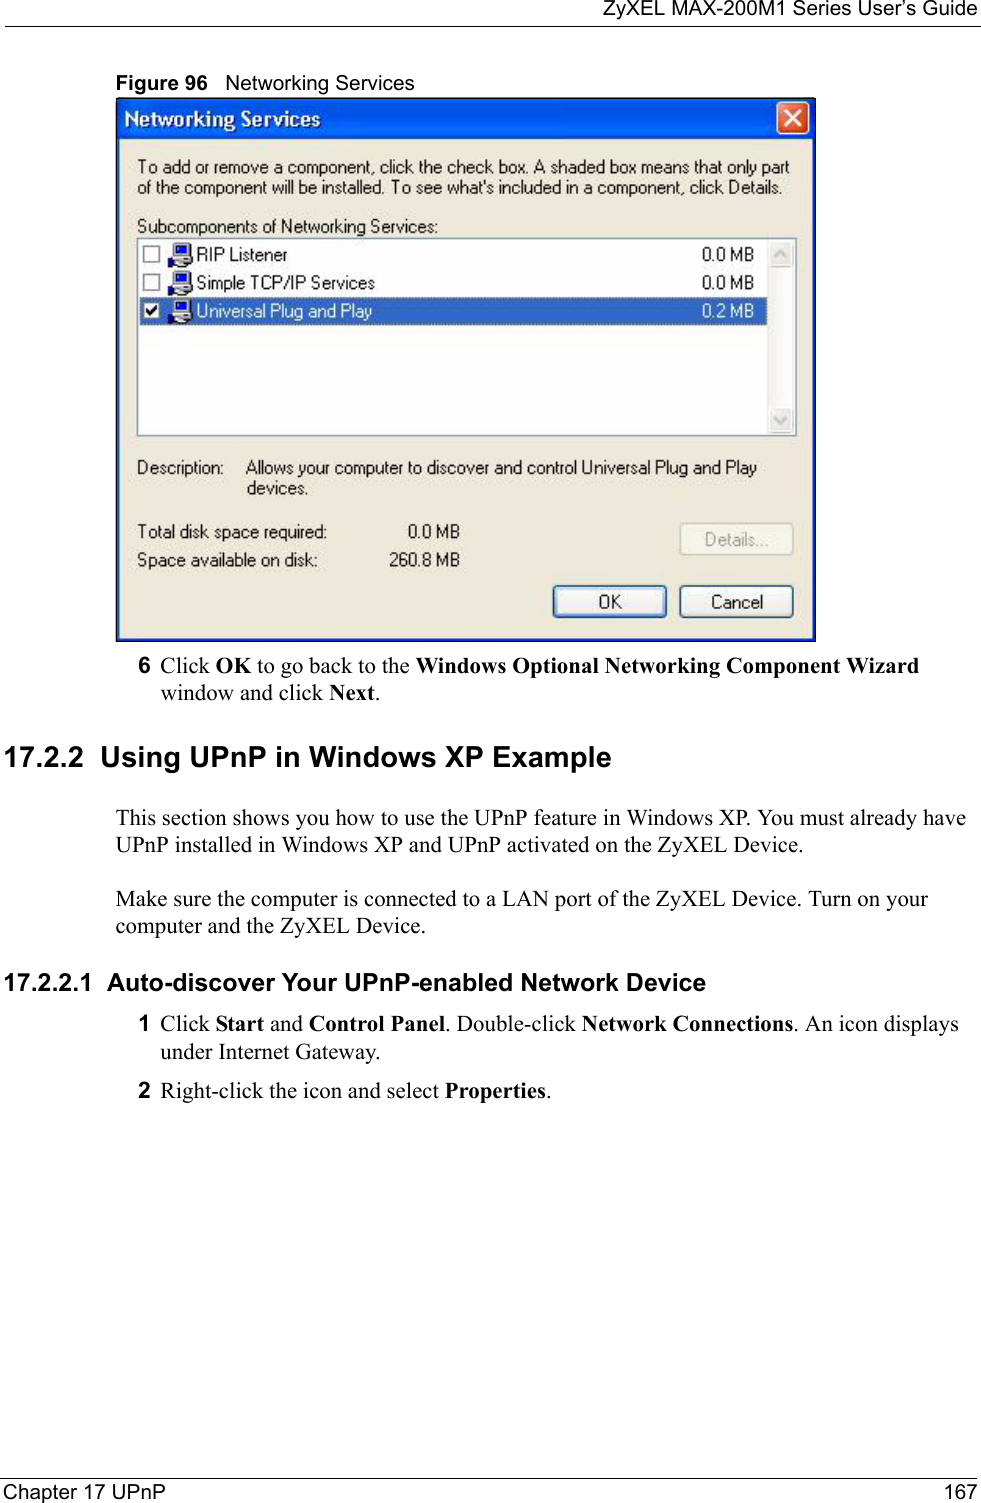 ZyXEL MAX-200M1 Series User’s GuideChapter 17 UPnP 167Figure 96   Networking Services6Click OK to go back to the Windows Optional Networking Component Wizard window and click Next. 17.2.2  Using UPnP in Windows XP ExampleThis section shows you how to use the UPnP feature in Windows XP. You must already have UPnP installed in Windows XP and UPnP activated on the ZyXEL Device.Make sure the computer is connected to a LAN port of the ZyXEL Device. Turn on your computer and the ZyXEL Device. 17.2.2.1  Auto-discover Your UPnP-enabled Network Device1Click Start and Control Panel. Double-click Network Connections. An icon displays under Internet Gateway.2Right-click the icon and select Properties. 